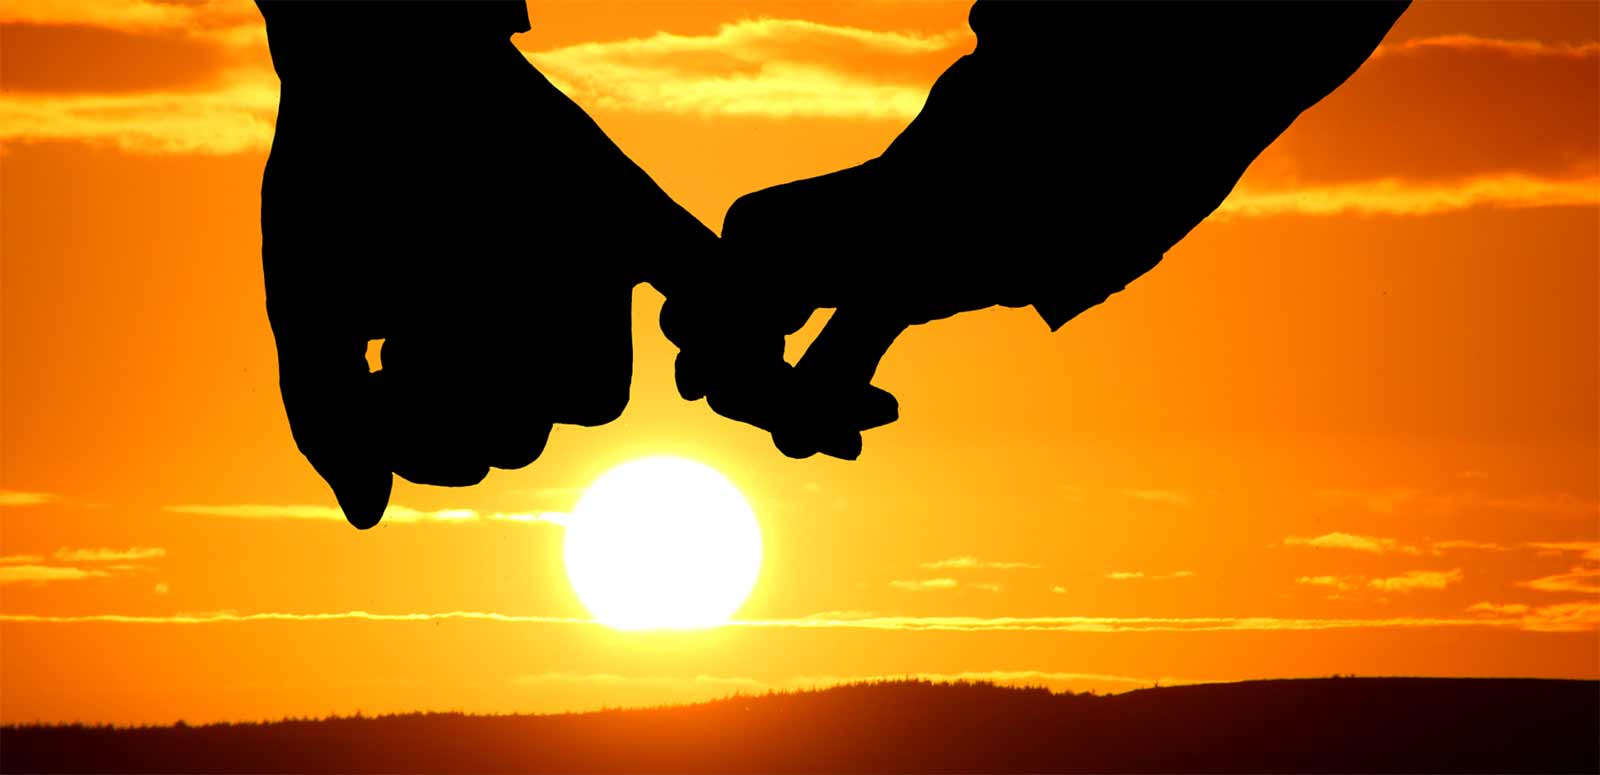 Couple Therapy with two people holding hands againsts a sun rise